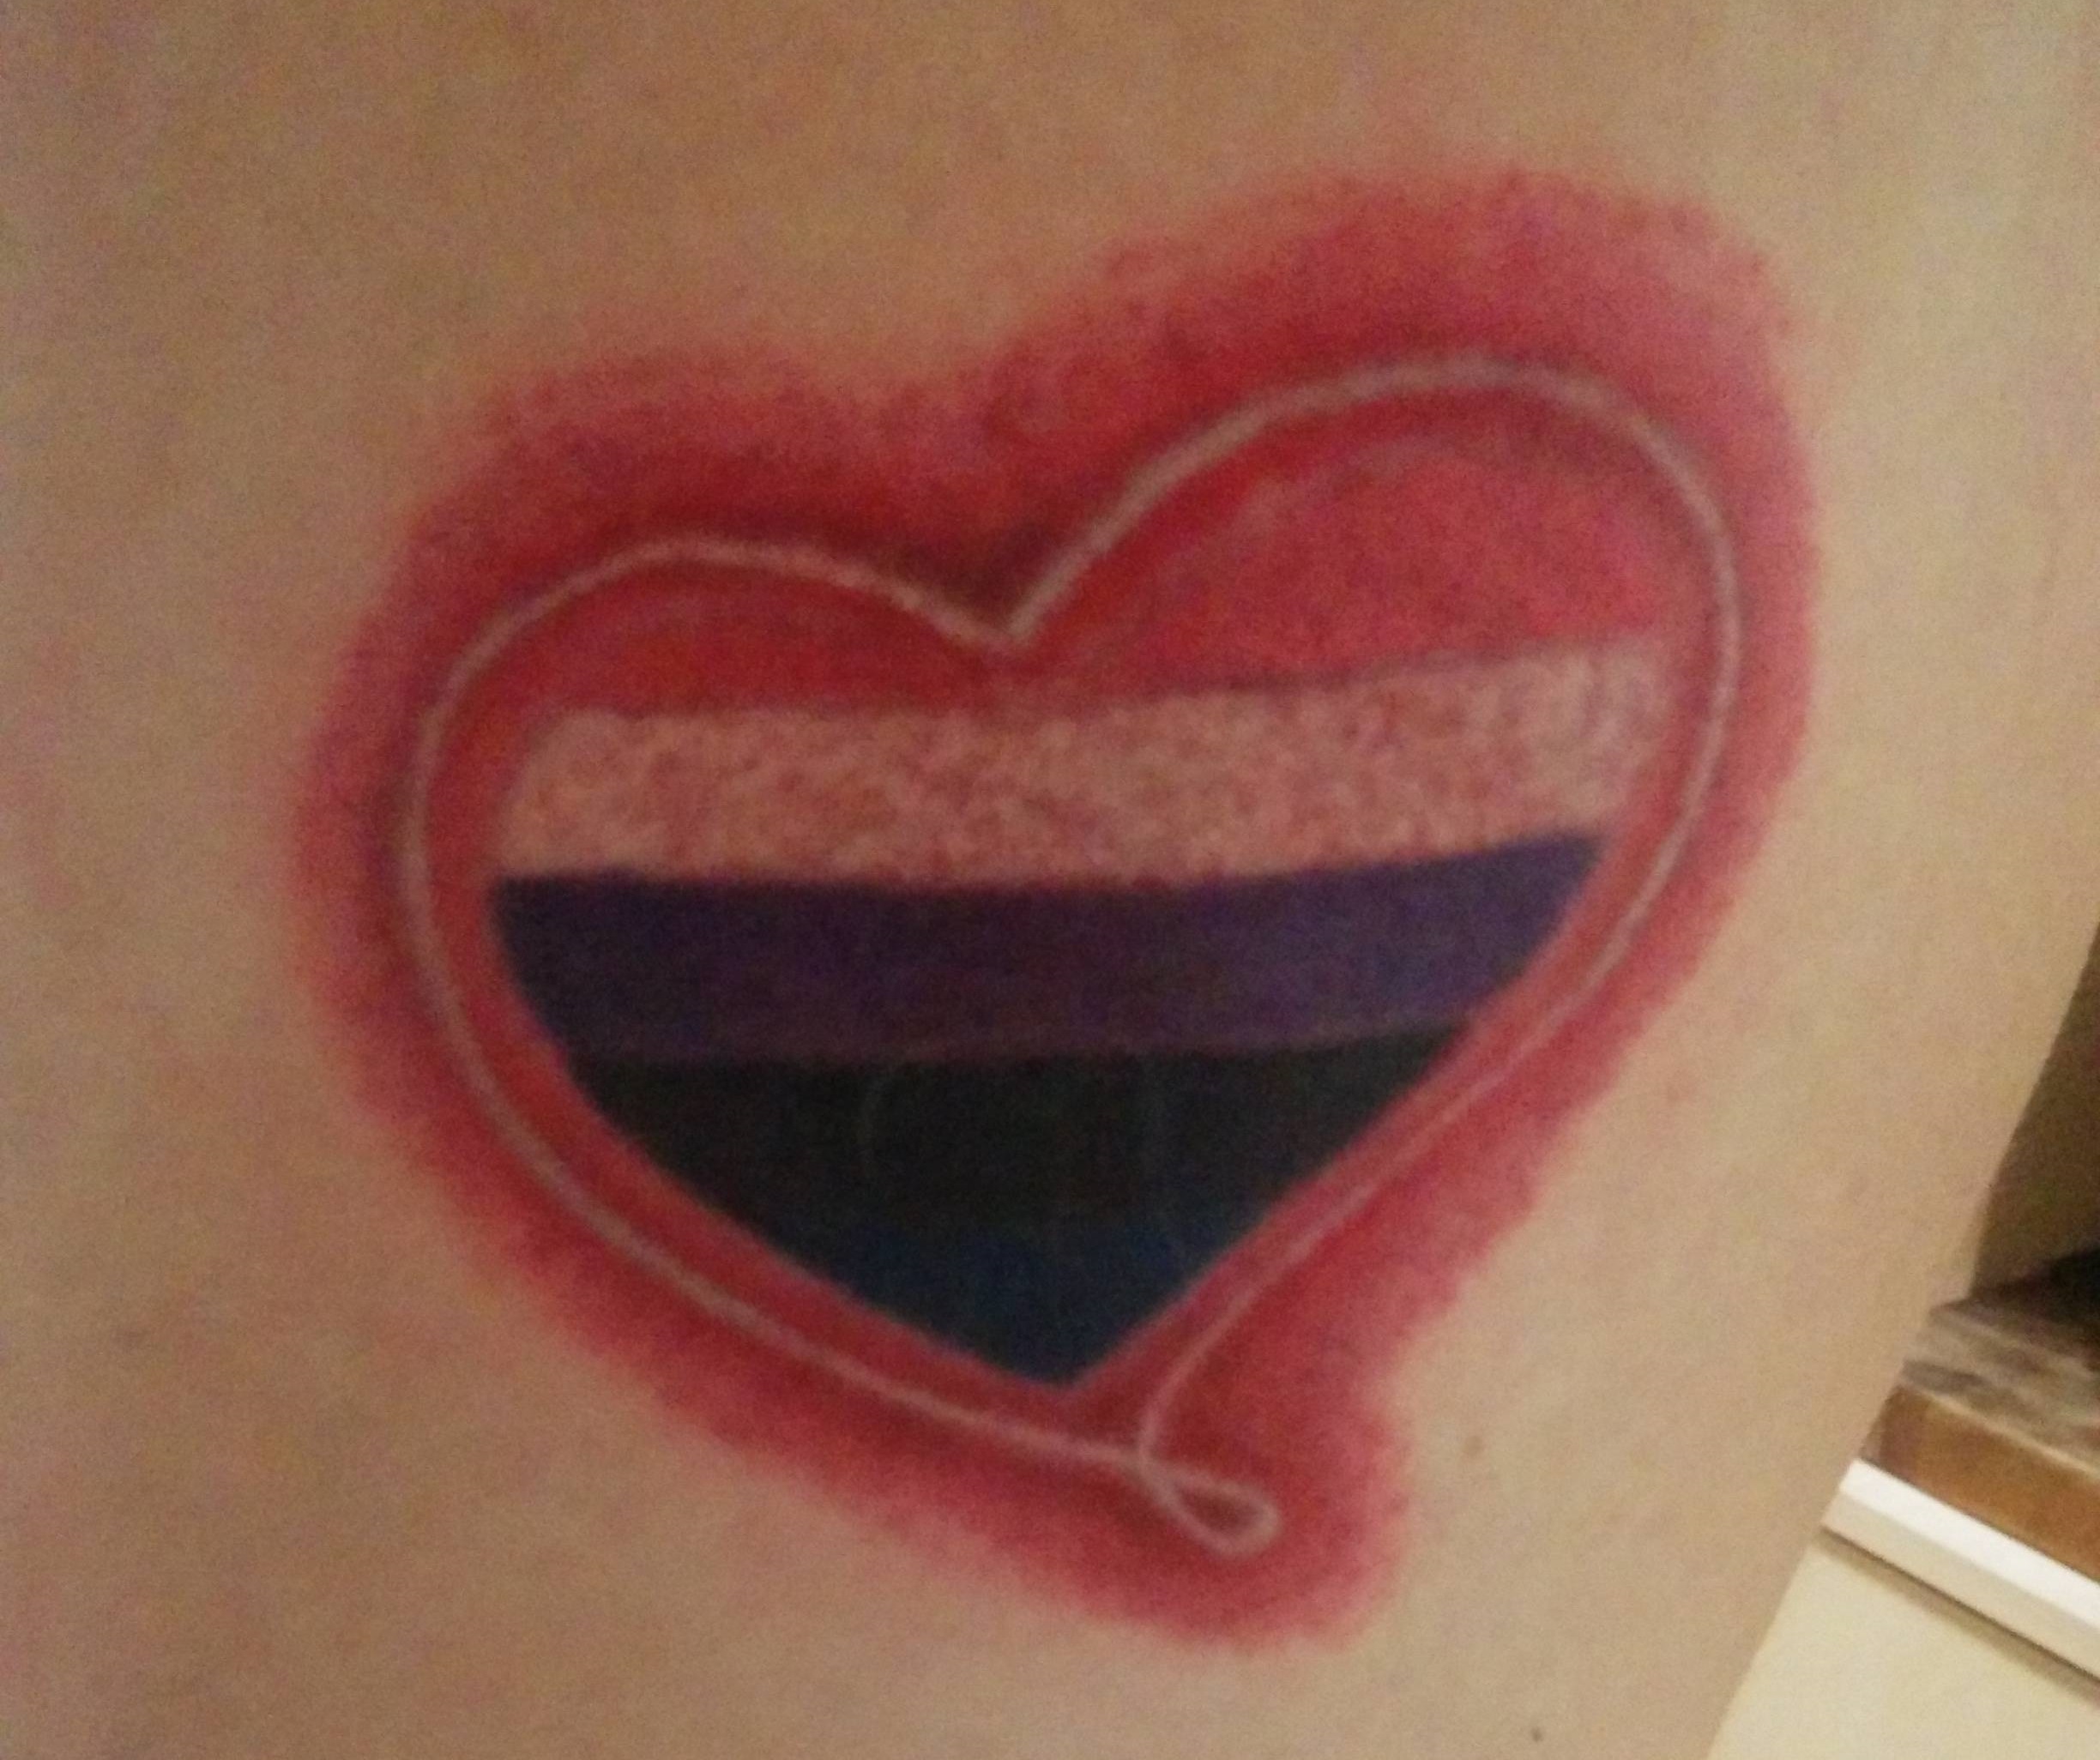 A photo of the tattoo from a more direct angle.